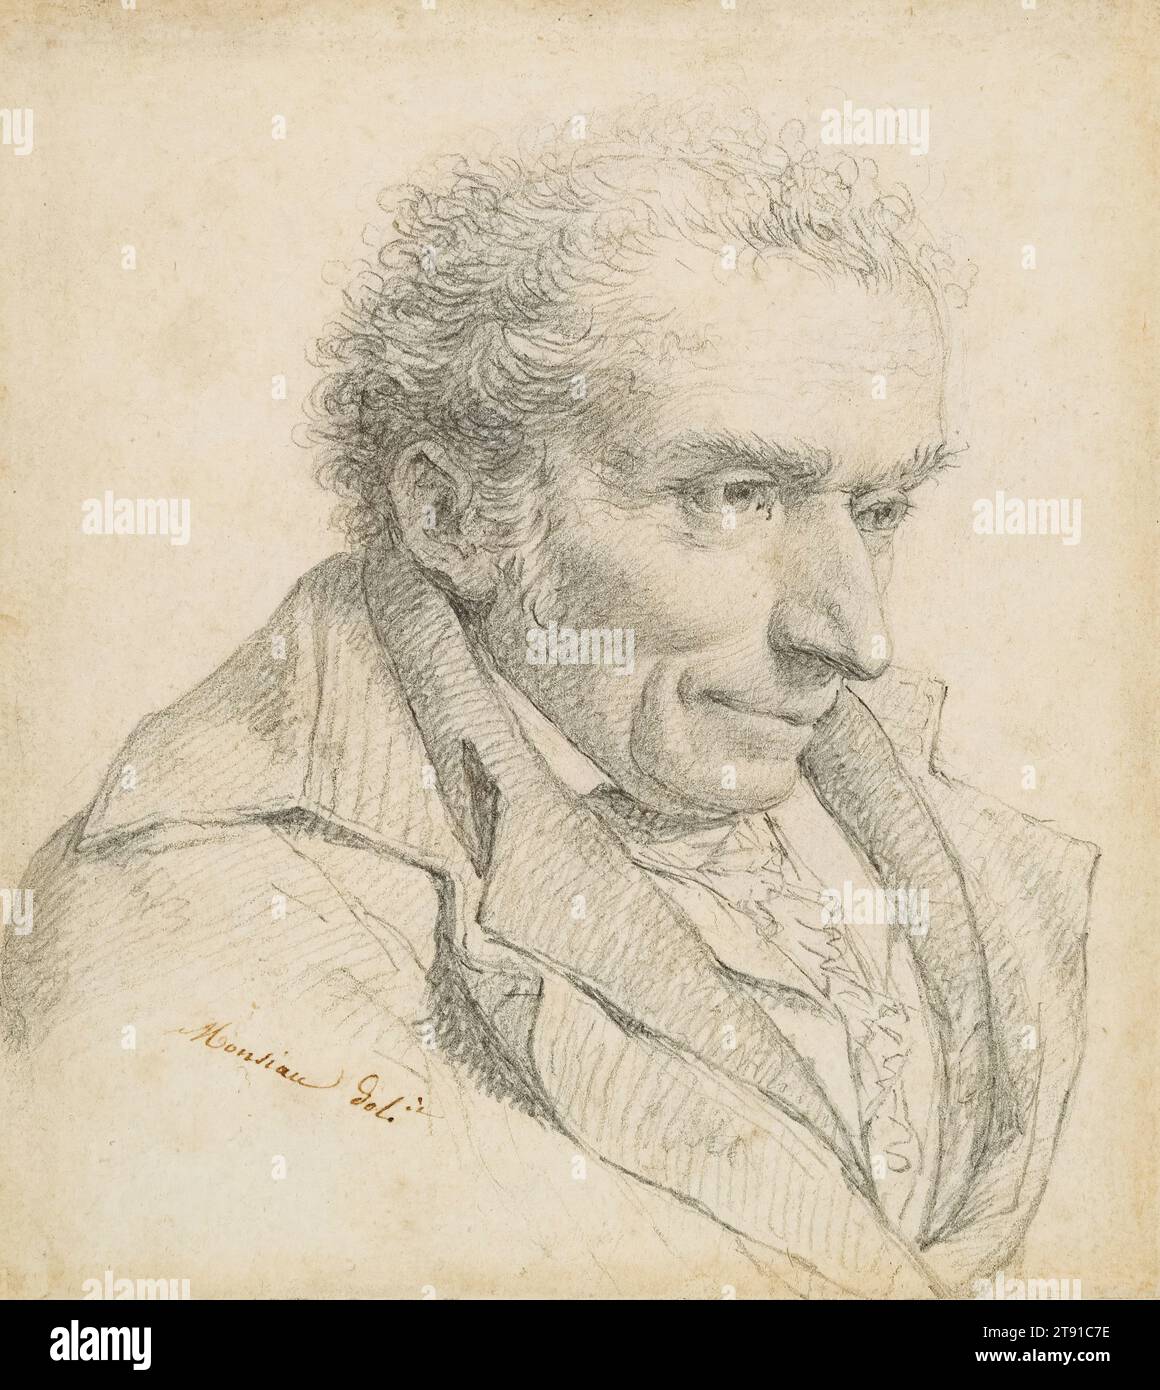 Portrait of Houdon, c. 1803-1808, Nicolas-André Monsiau, French, 1754 - 1837, 5 1/16 x 4 9/16 in. (12.86 x 11.59 cm) (image)10 1/4 x 10 7/8 x 3/8 in. (26.04 x 27.62 x 0.95 cm) (outer frame), Graphite, France, 19th century, Monsiau was a distinguished painter of religious, historical and modern themes as well as a prolific illustrator of books. He became a member of the Royal Academy in 1789 and exhibited his paintings and drawings at the biennial Paris Salons from 1787 until 1833. The subject of Monsiau's portait drawing is Jean-Antoine Houdon (1754-1828), himself a renowned portraitist Stock Photo